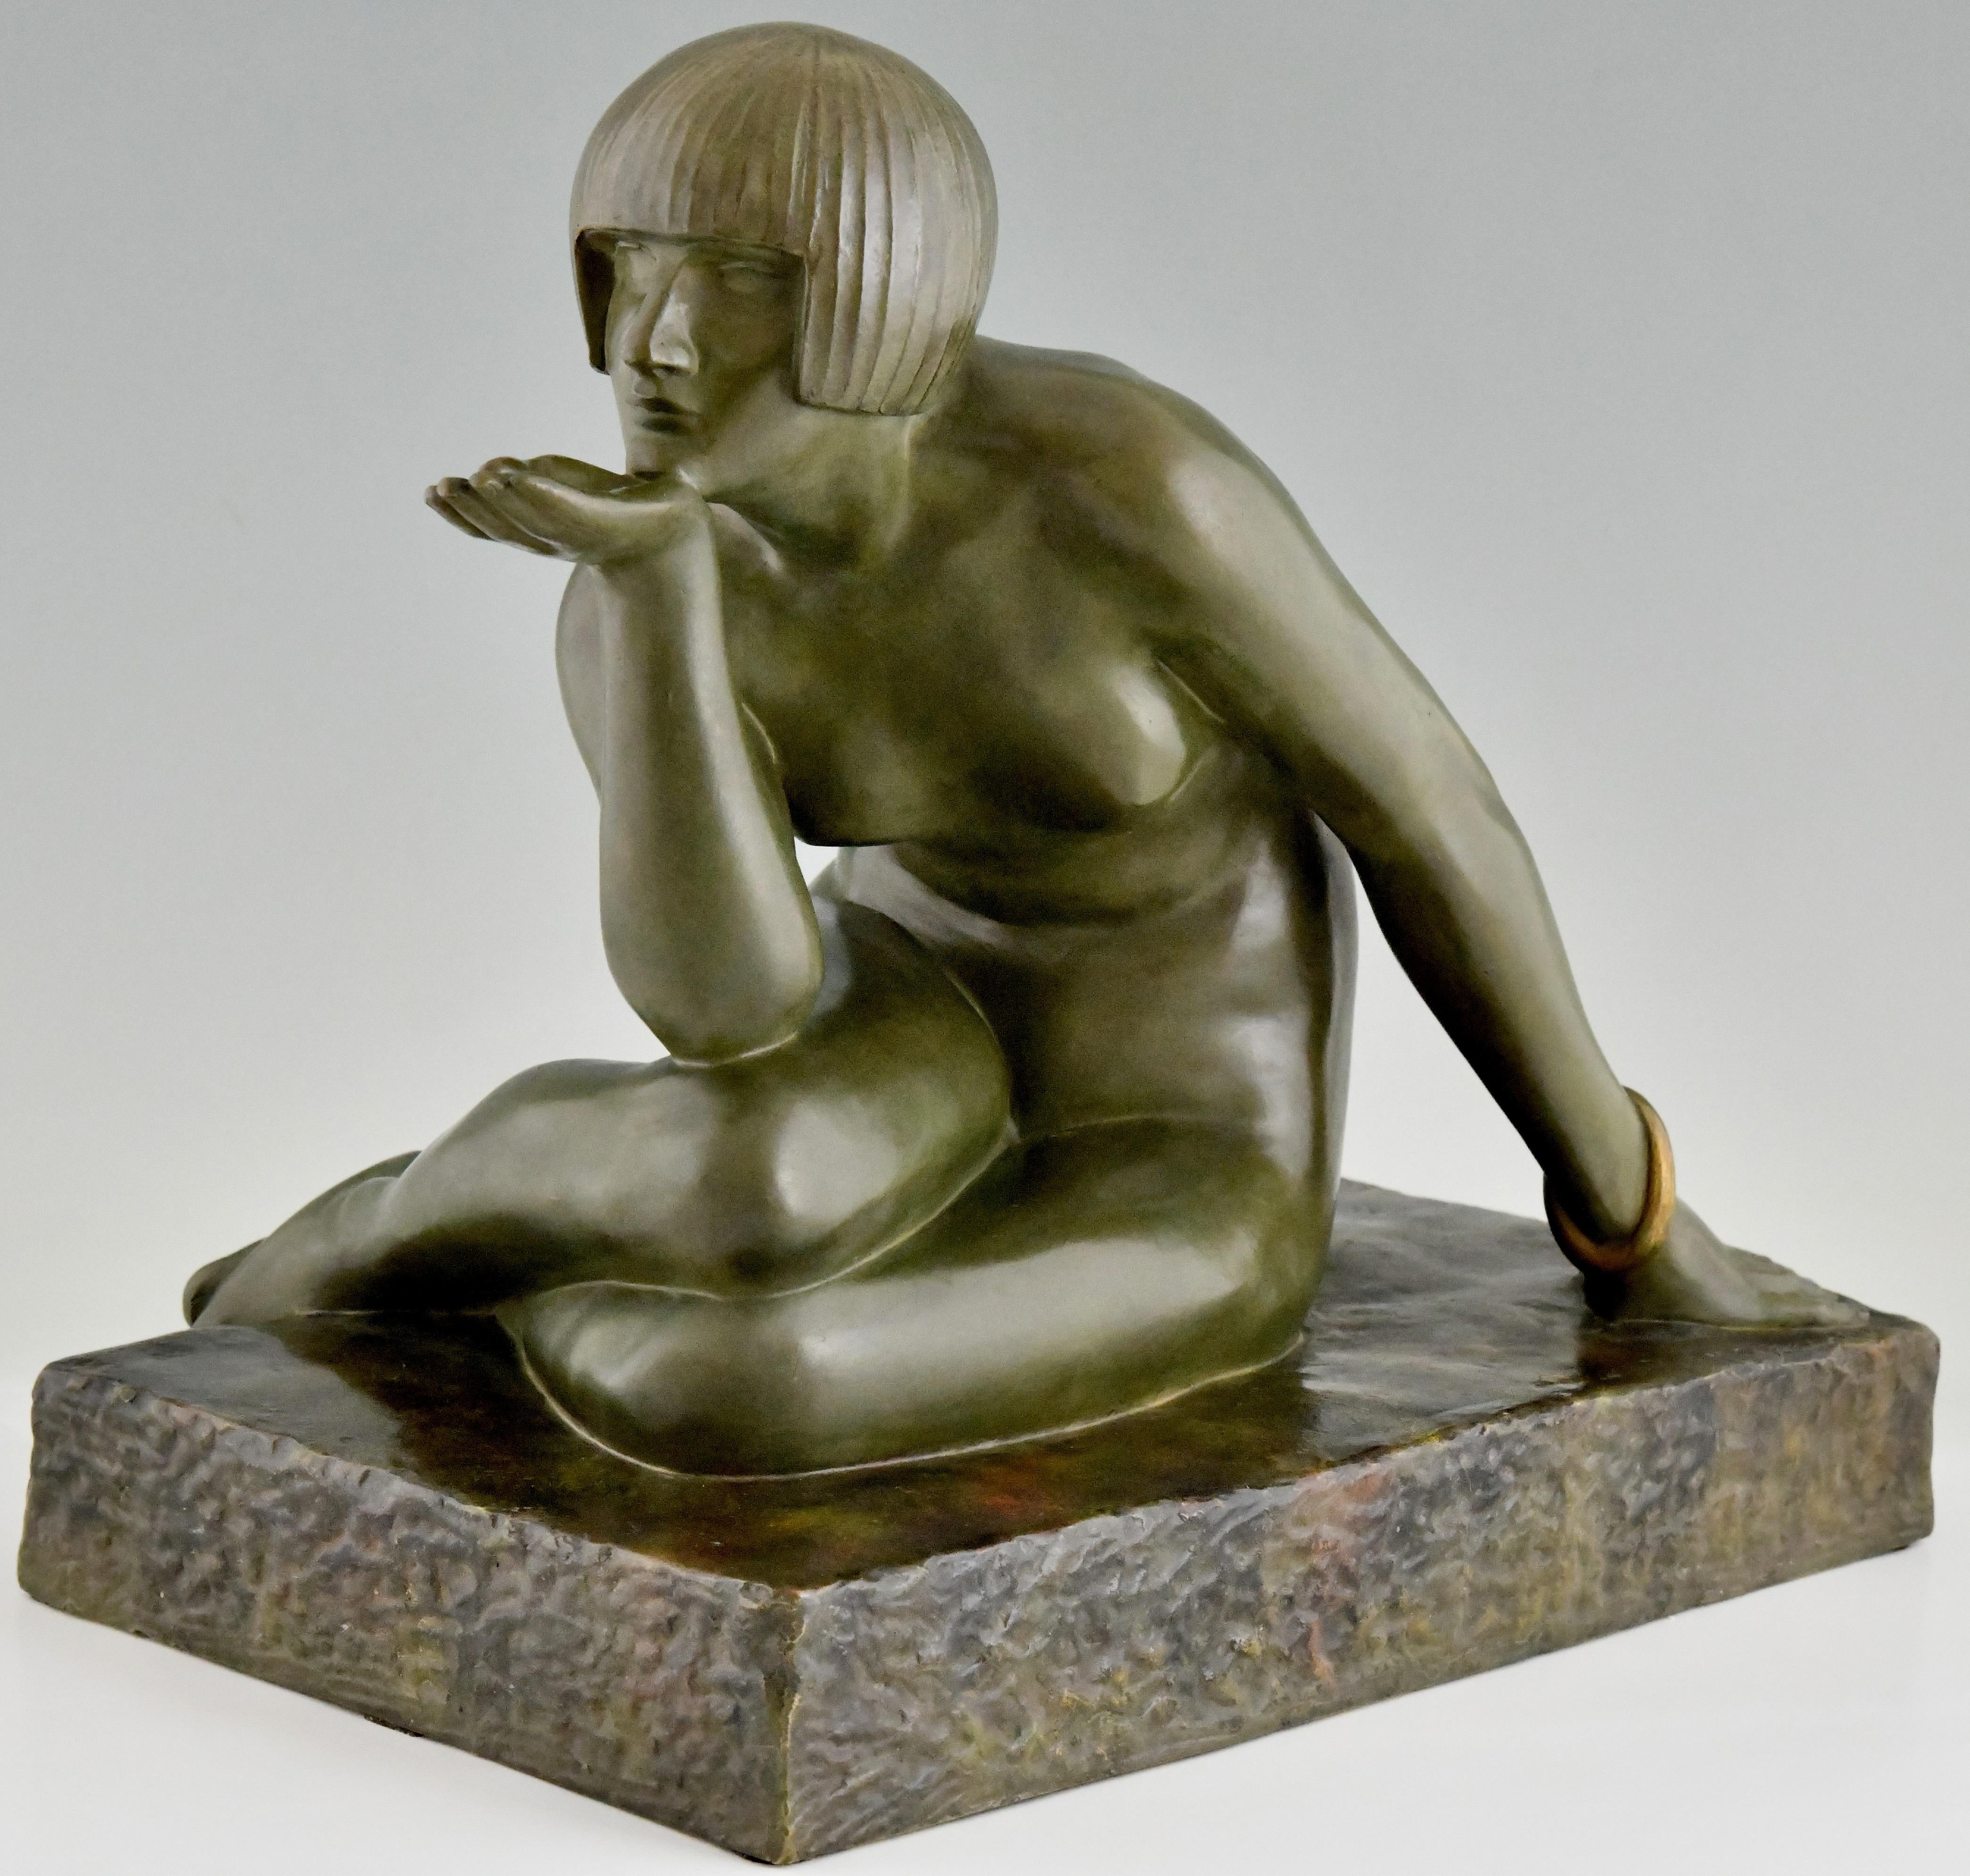 Enigma Art Deco bronze sculpture seated nude with bracelet by Maurice Guiraud Rivière.
With Les Neveux de Lehmann Paris Foundry seal. Numbered. 
Presented at the Exhibition of 1925.

This sculpture is illustrated in:
Art Deco sculpture by Victor